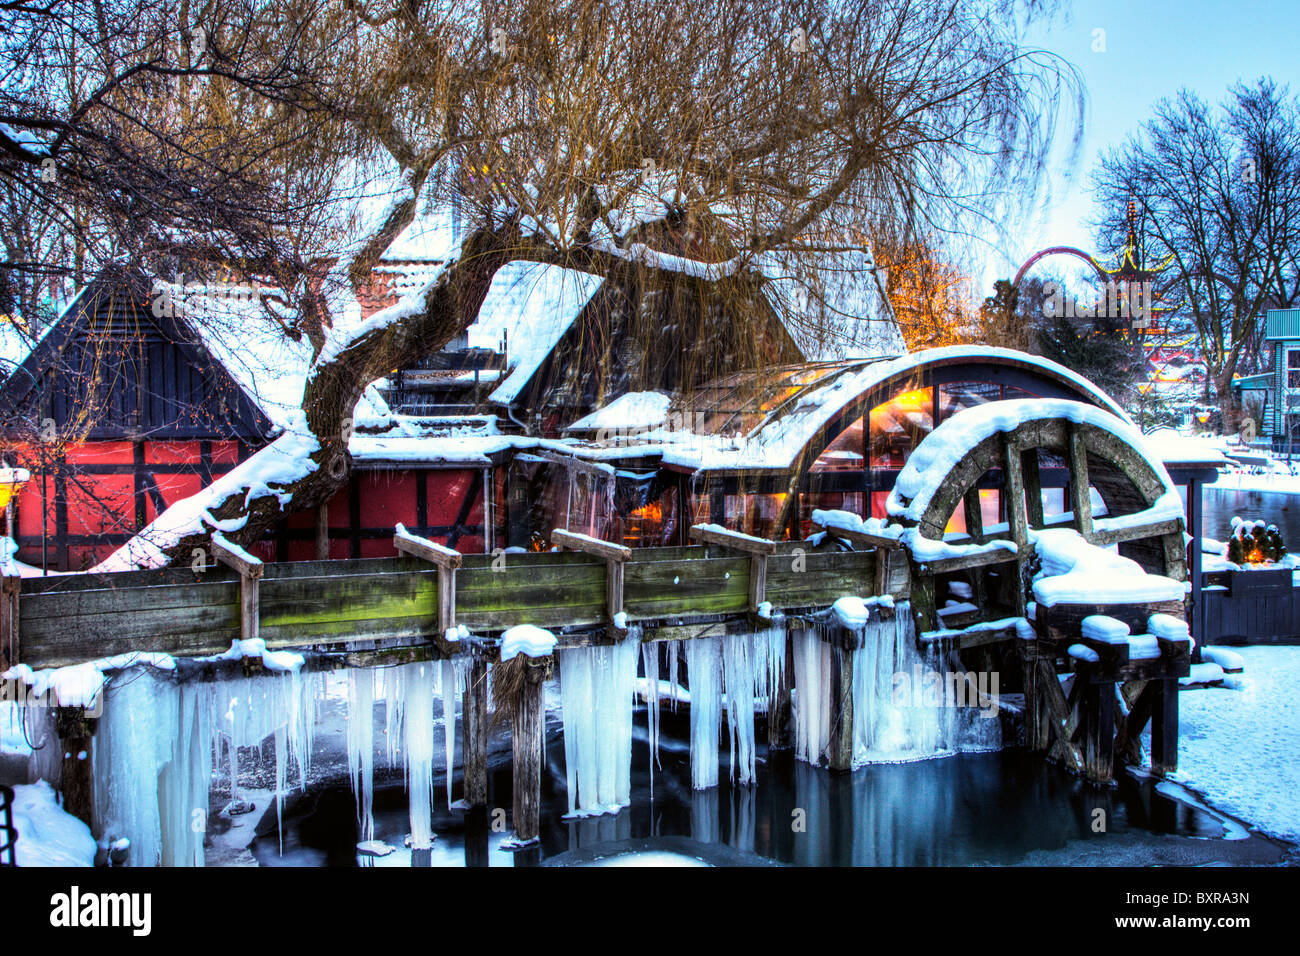 The old water mill in Tivoli Copenhagen covered in ice Stock Photo